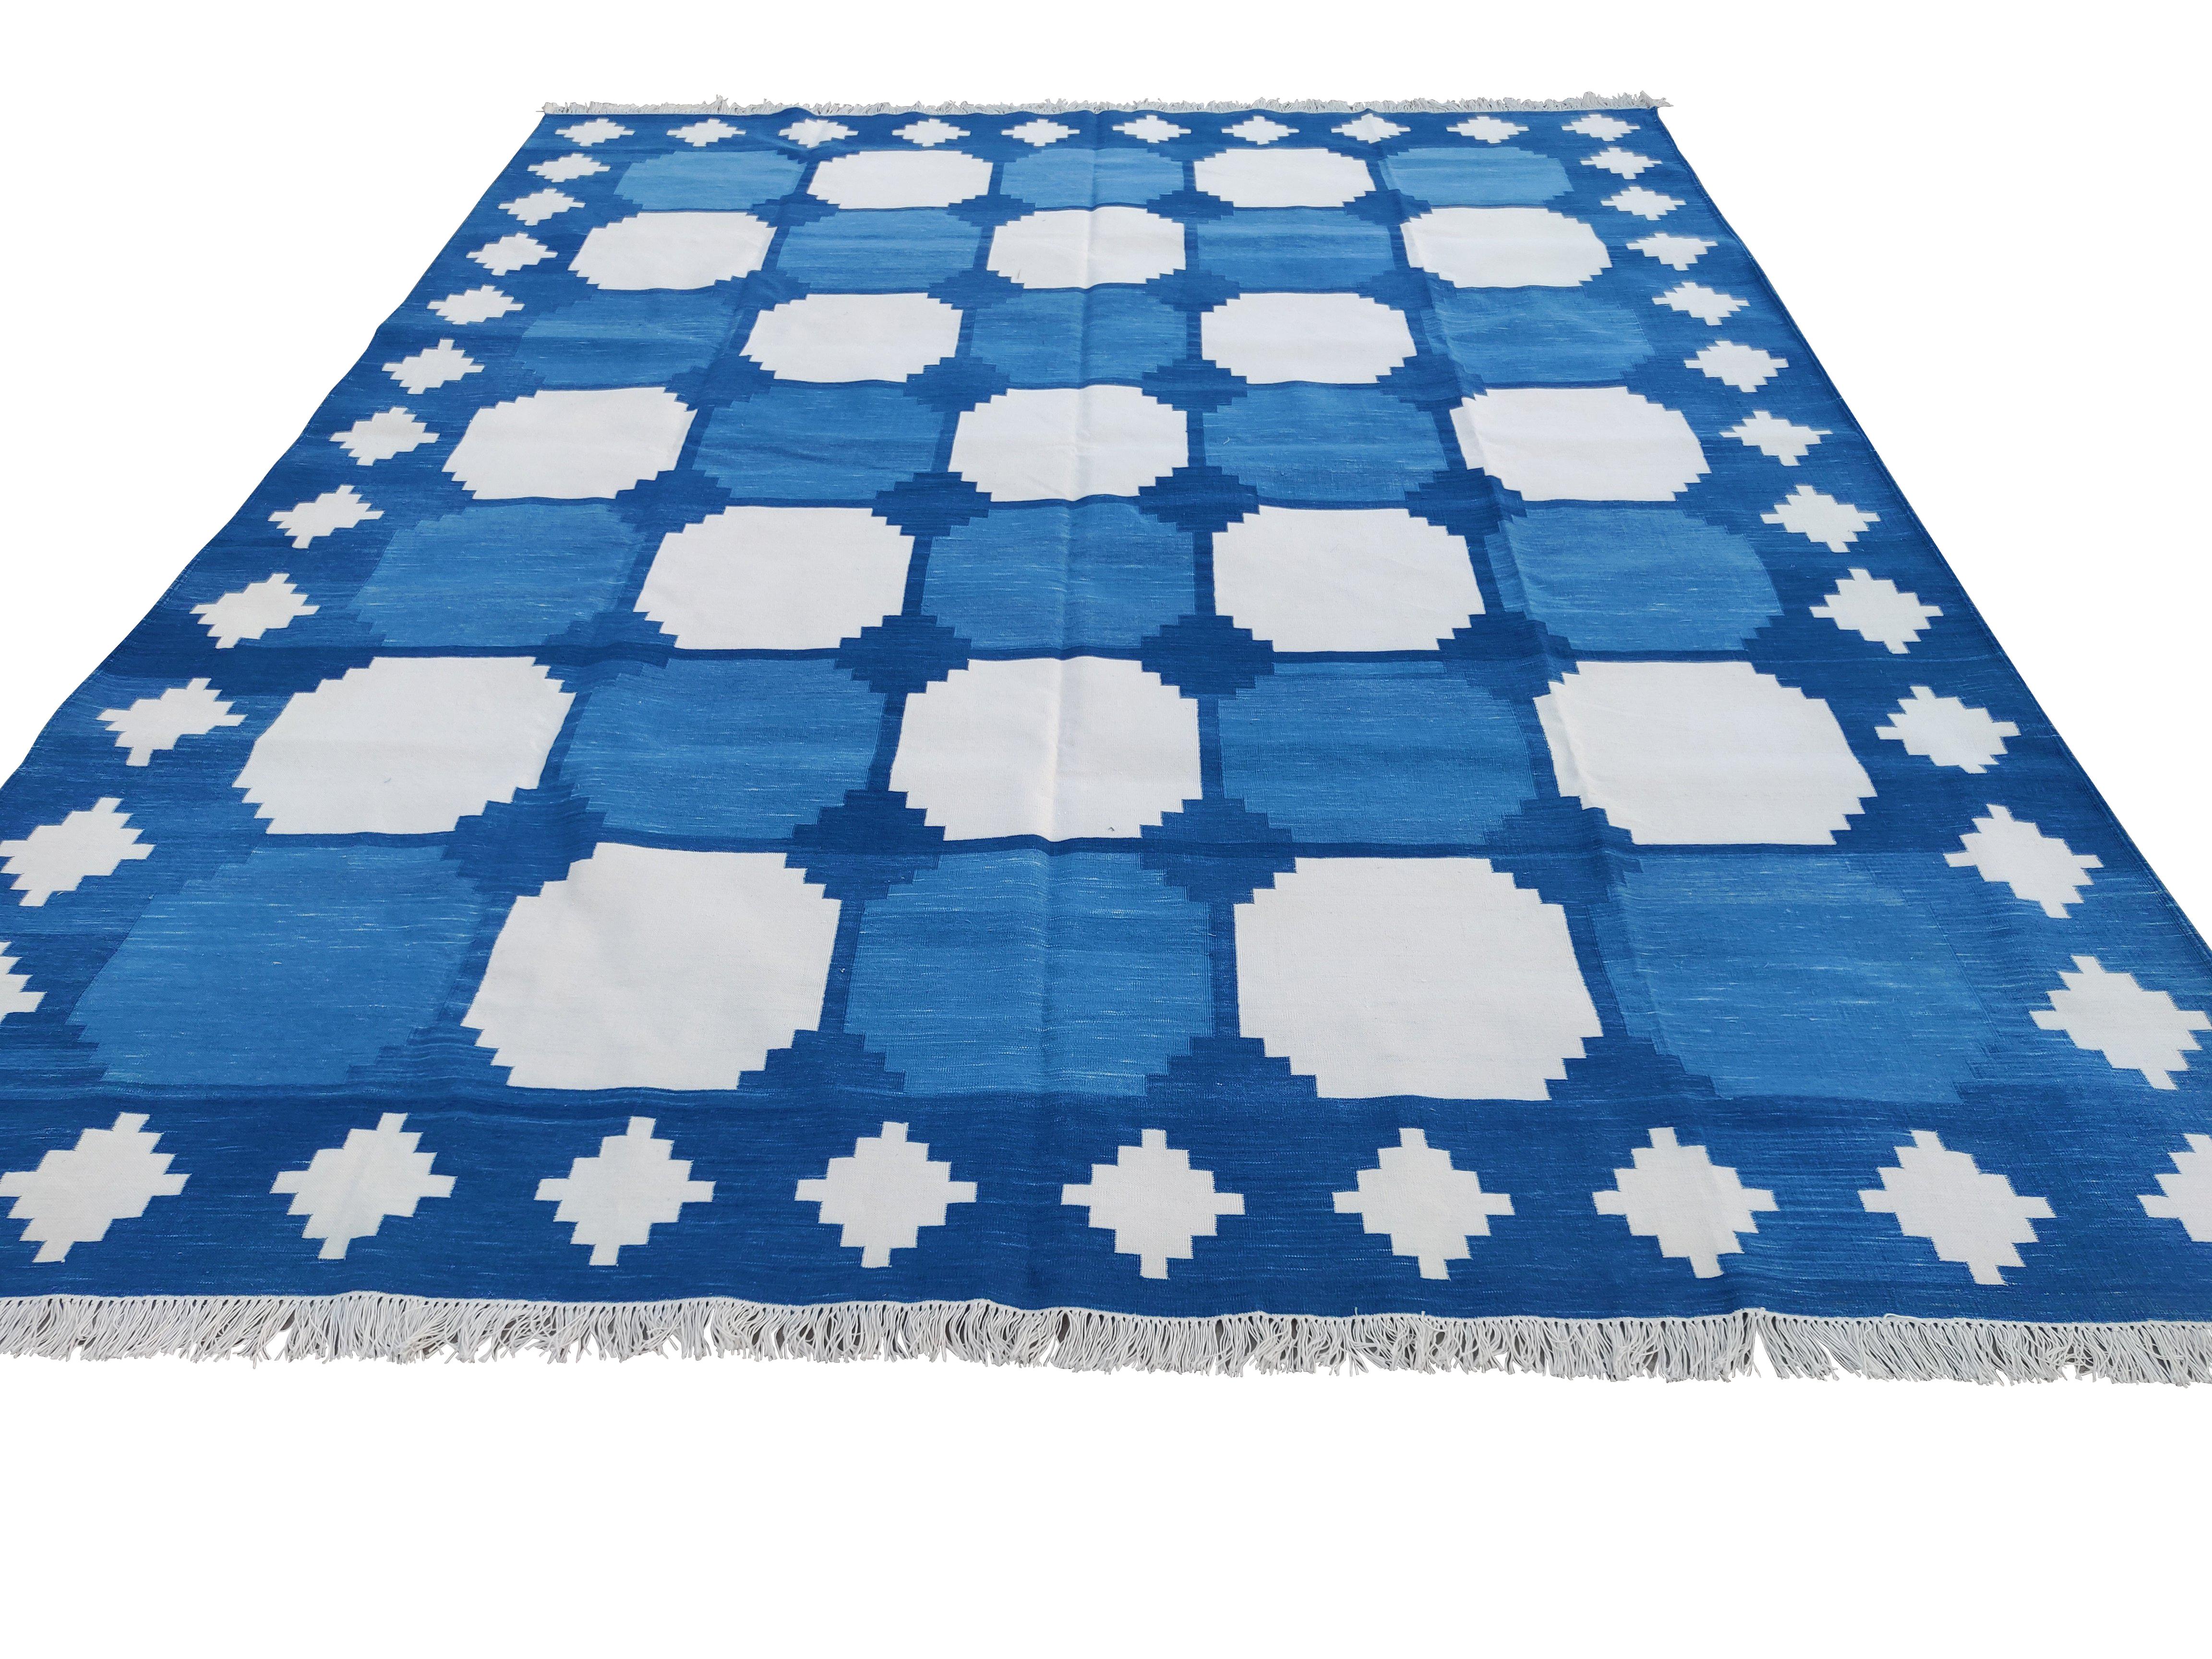 Hand-Woven Handmade Cotton Area Flat Weave Rug, Blue, White Geometric Indian Dhurrie-8x10 For Sale